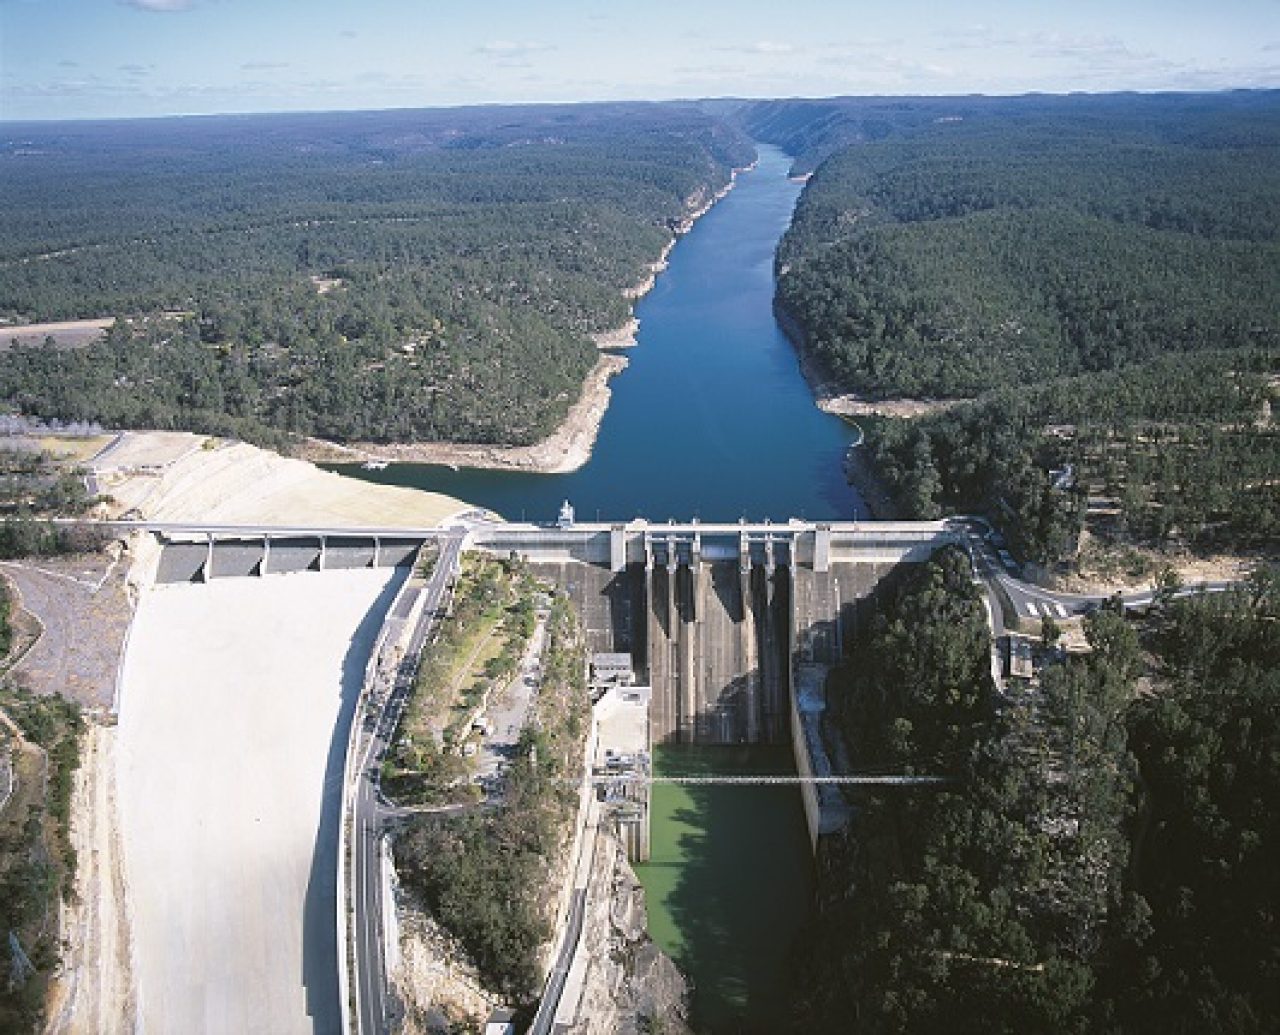 Dams and rivers